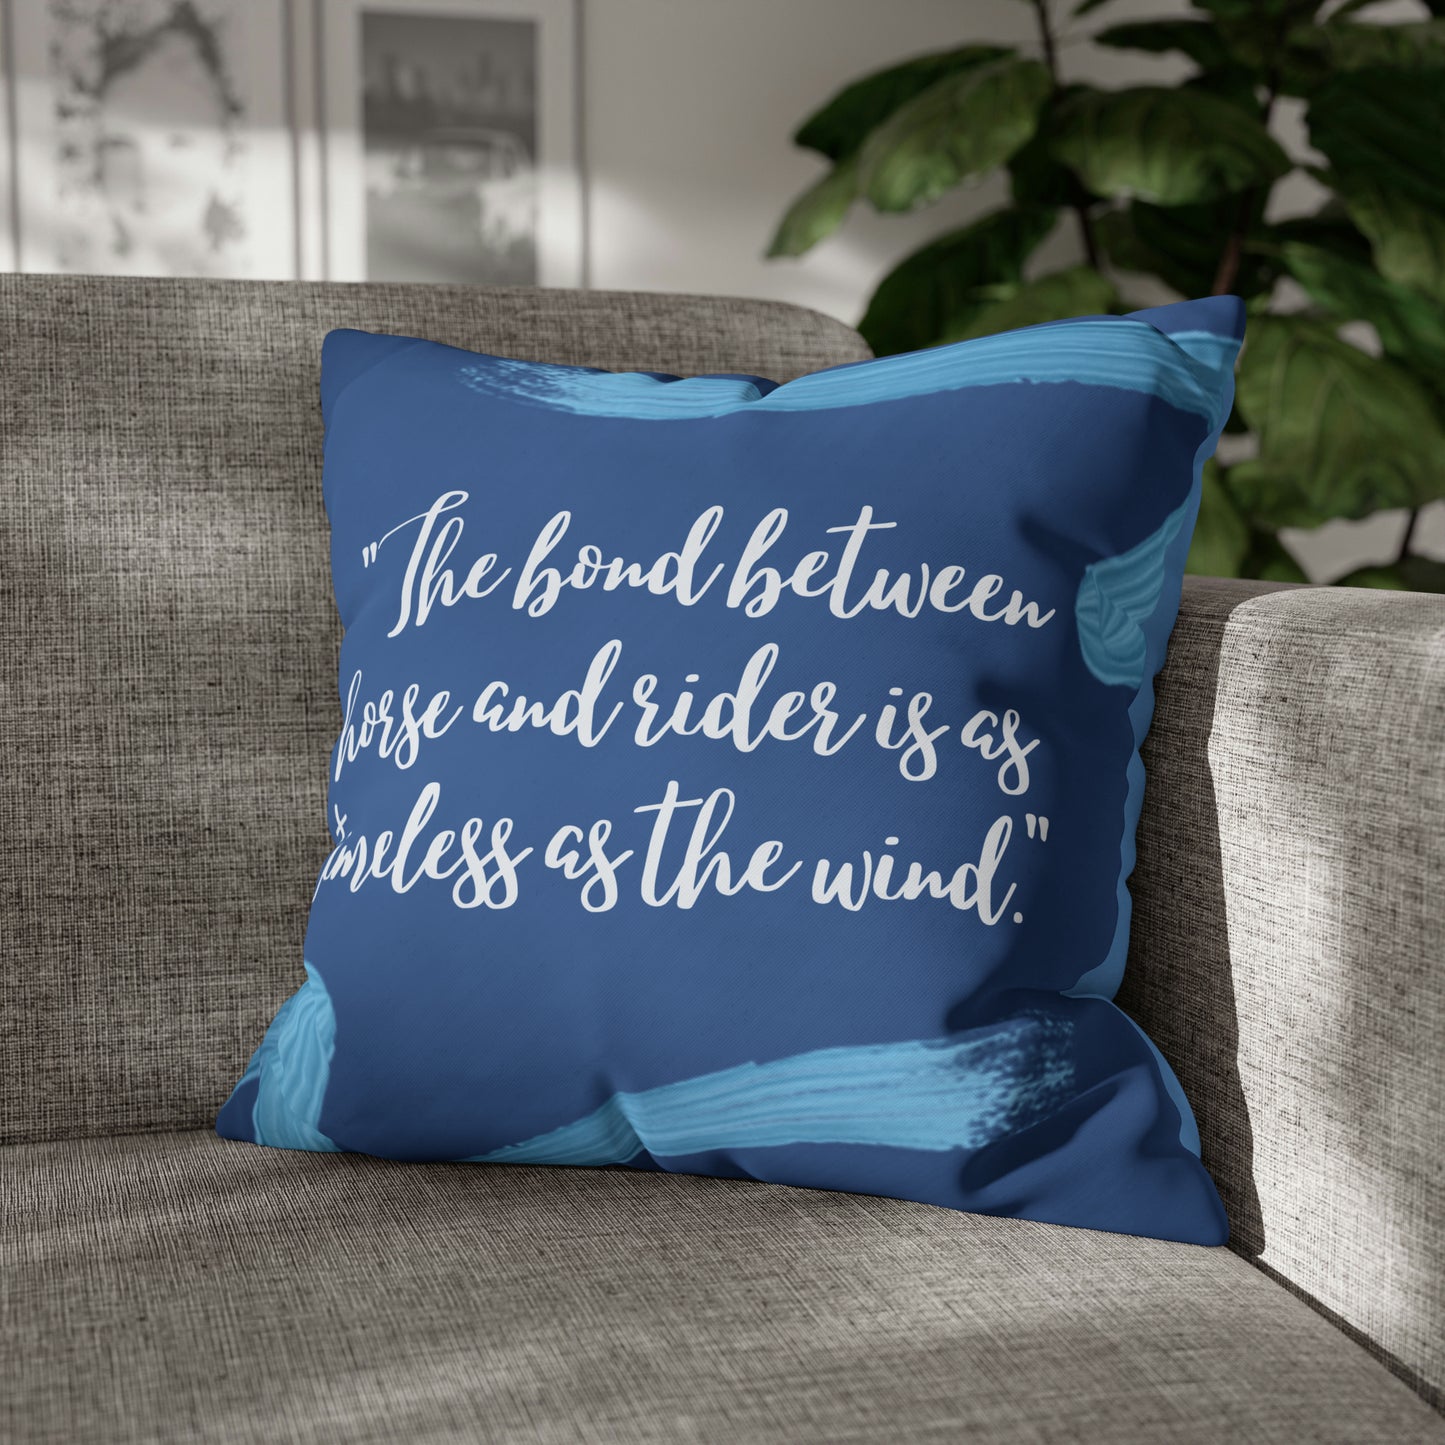 The bond between horse and rider: Pillowcase